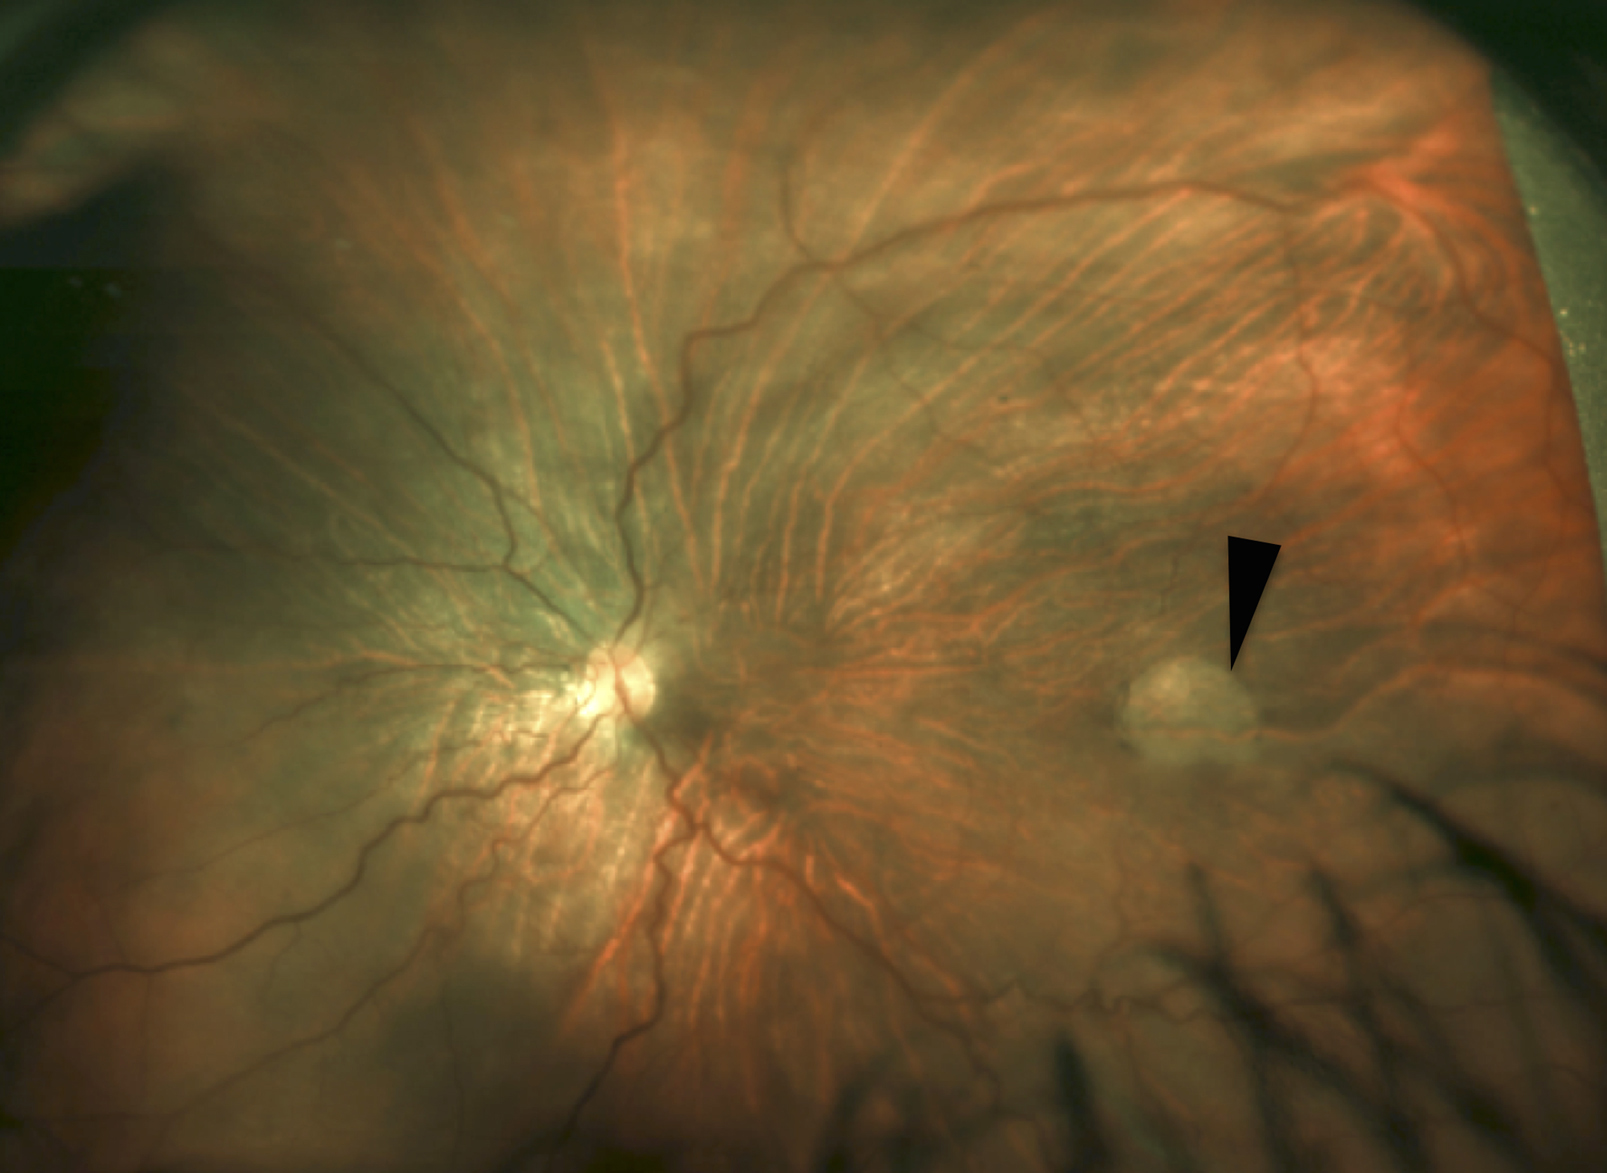 Optical coherence tomography findings and successful repair of retina detachment in Knobloch syndrome